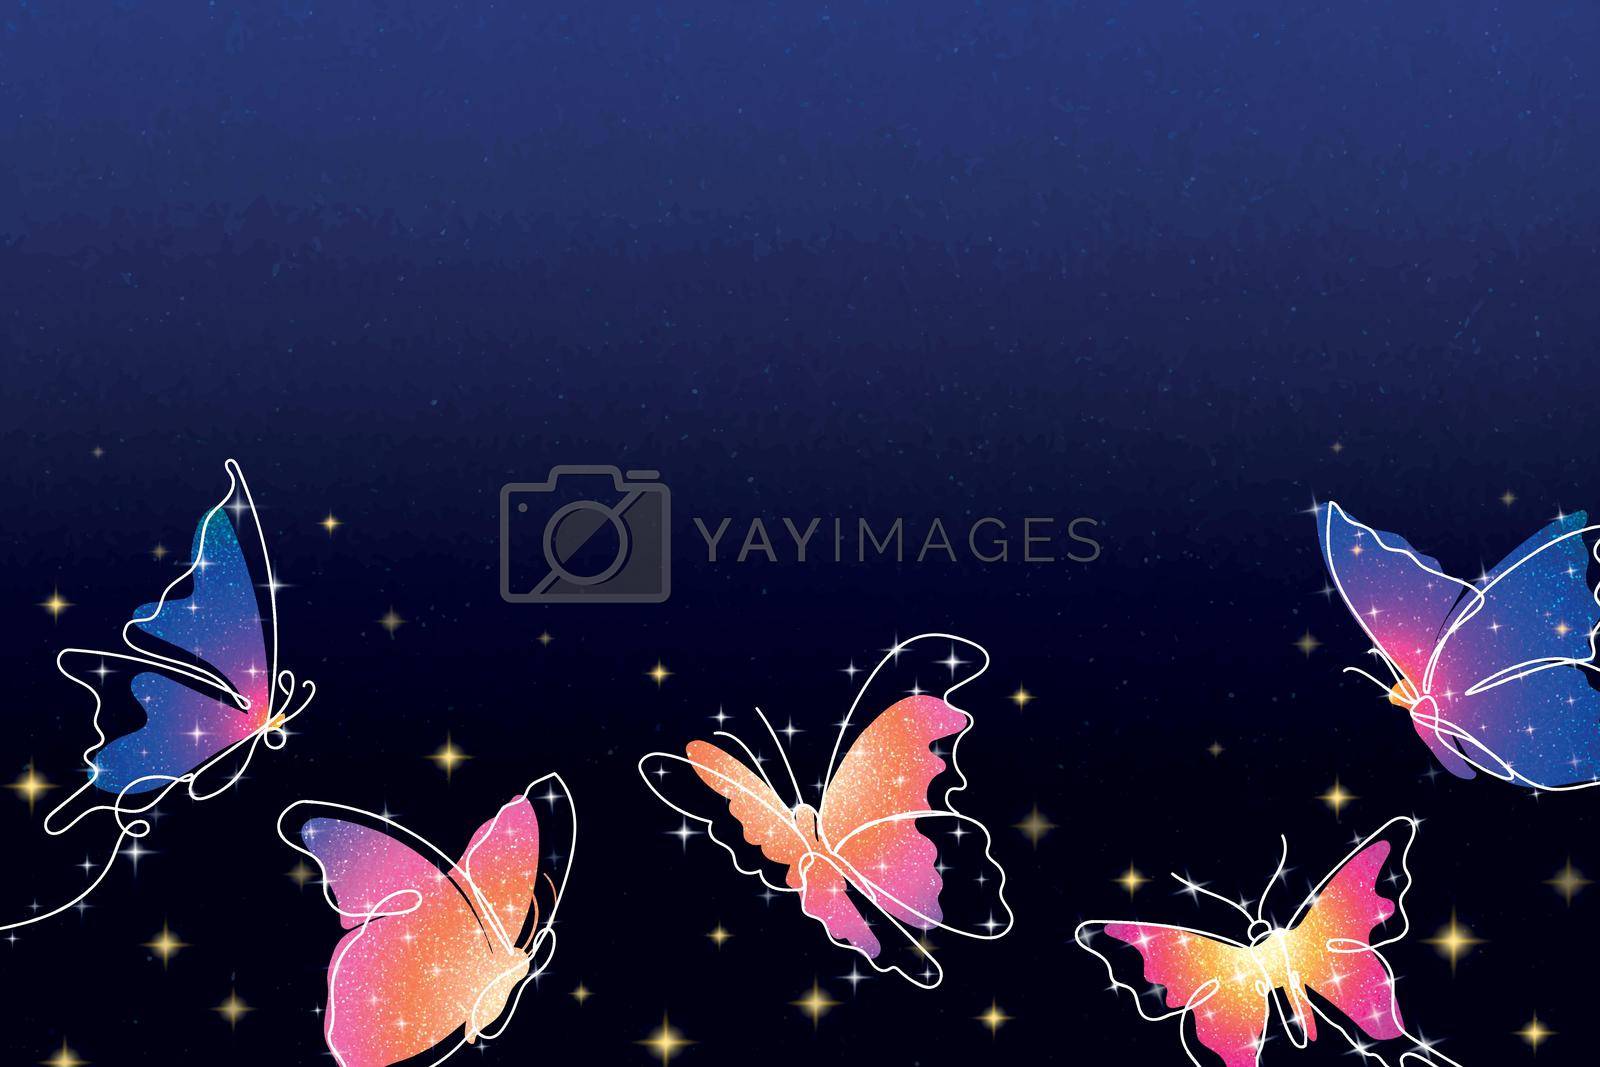 Royalty free image of background by vectorart